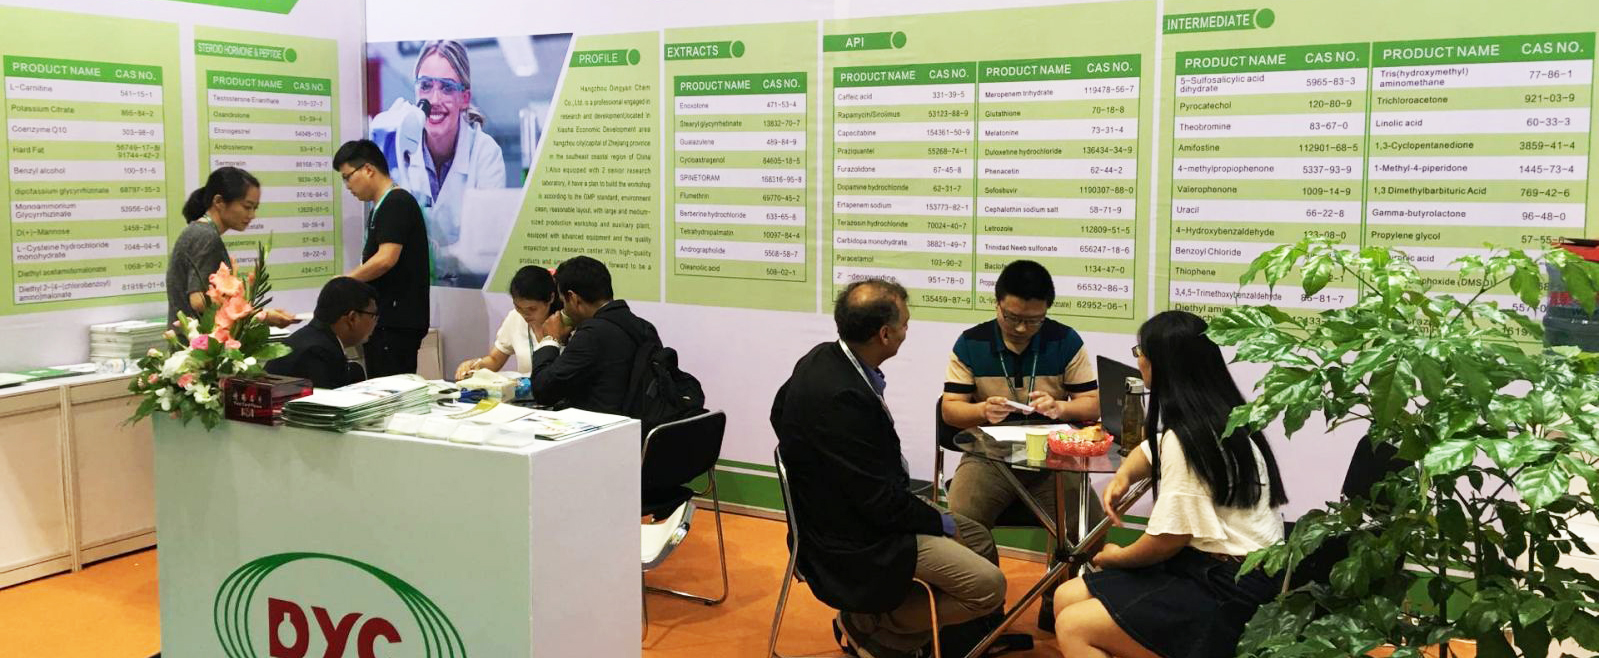 the exhibition we take part in:we participated in the cphi for many years. and actively participate in various exhibitions to promote their products,form which i know a lot of customers.